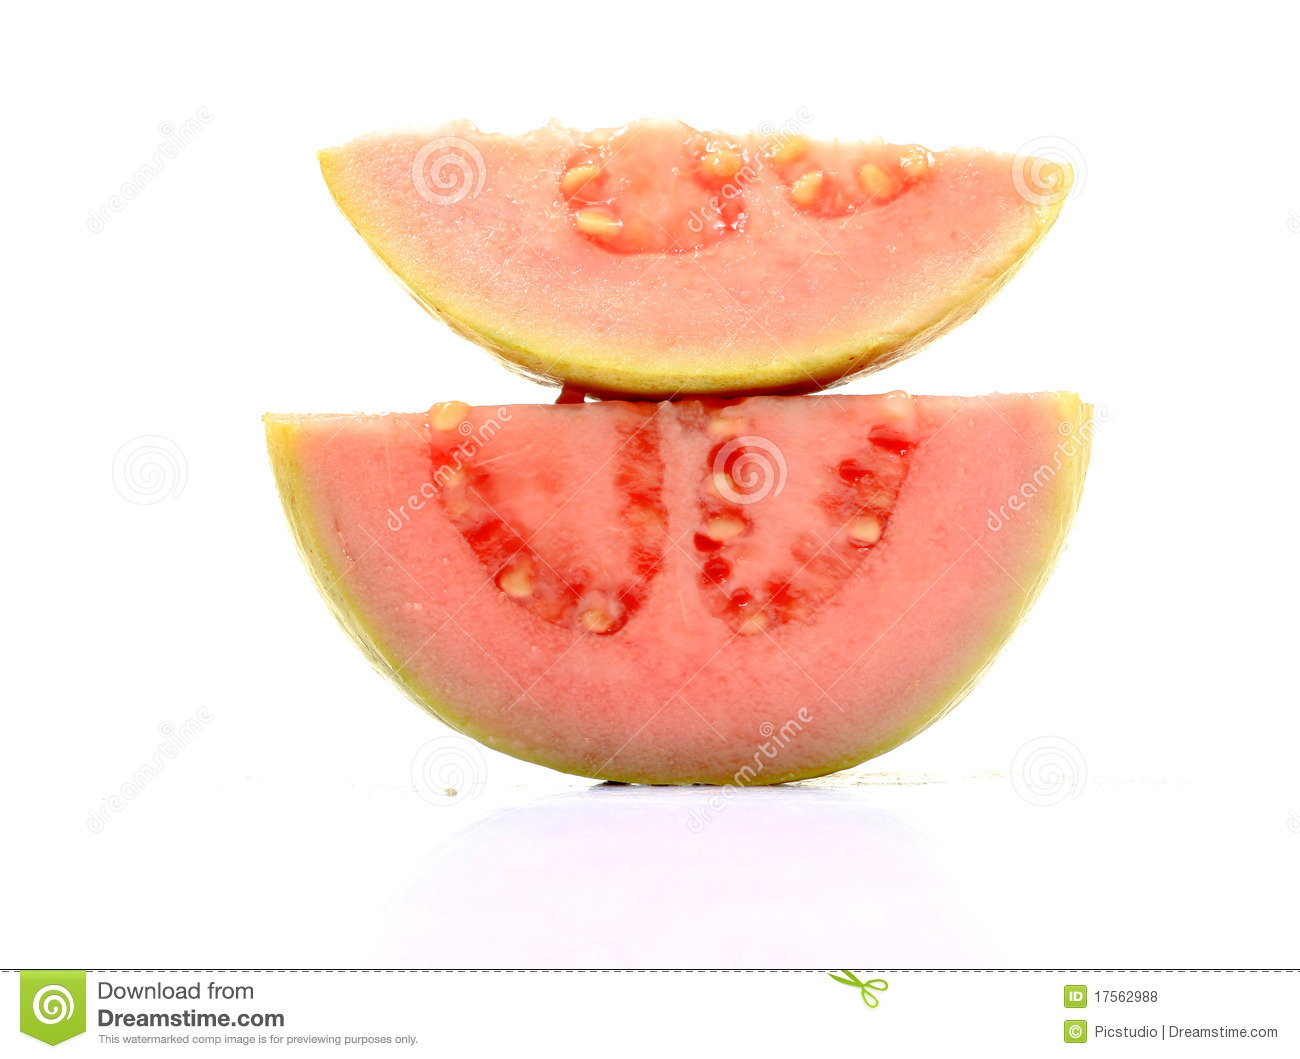 Pink Guava Slices Royalty Free Stock Photos   Image  17562988